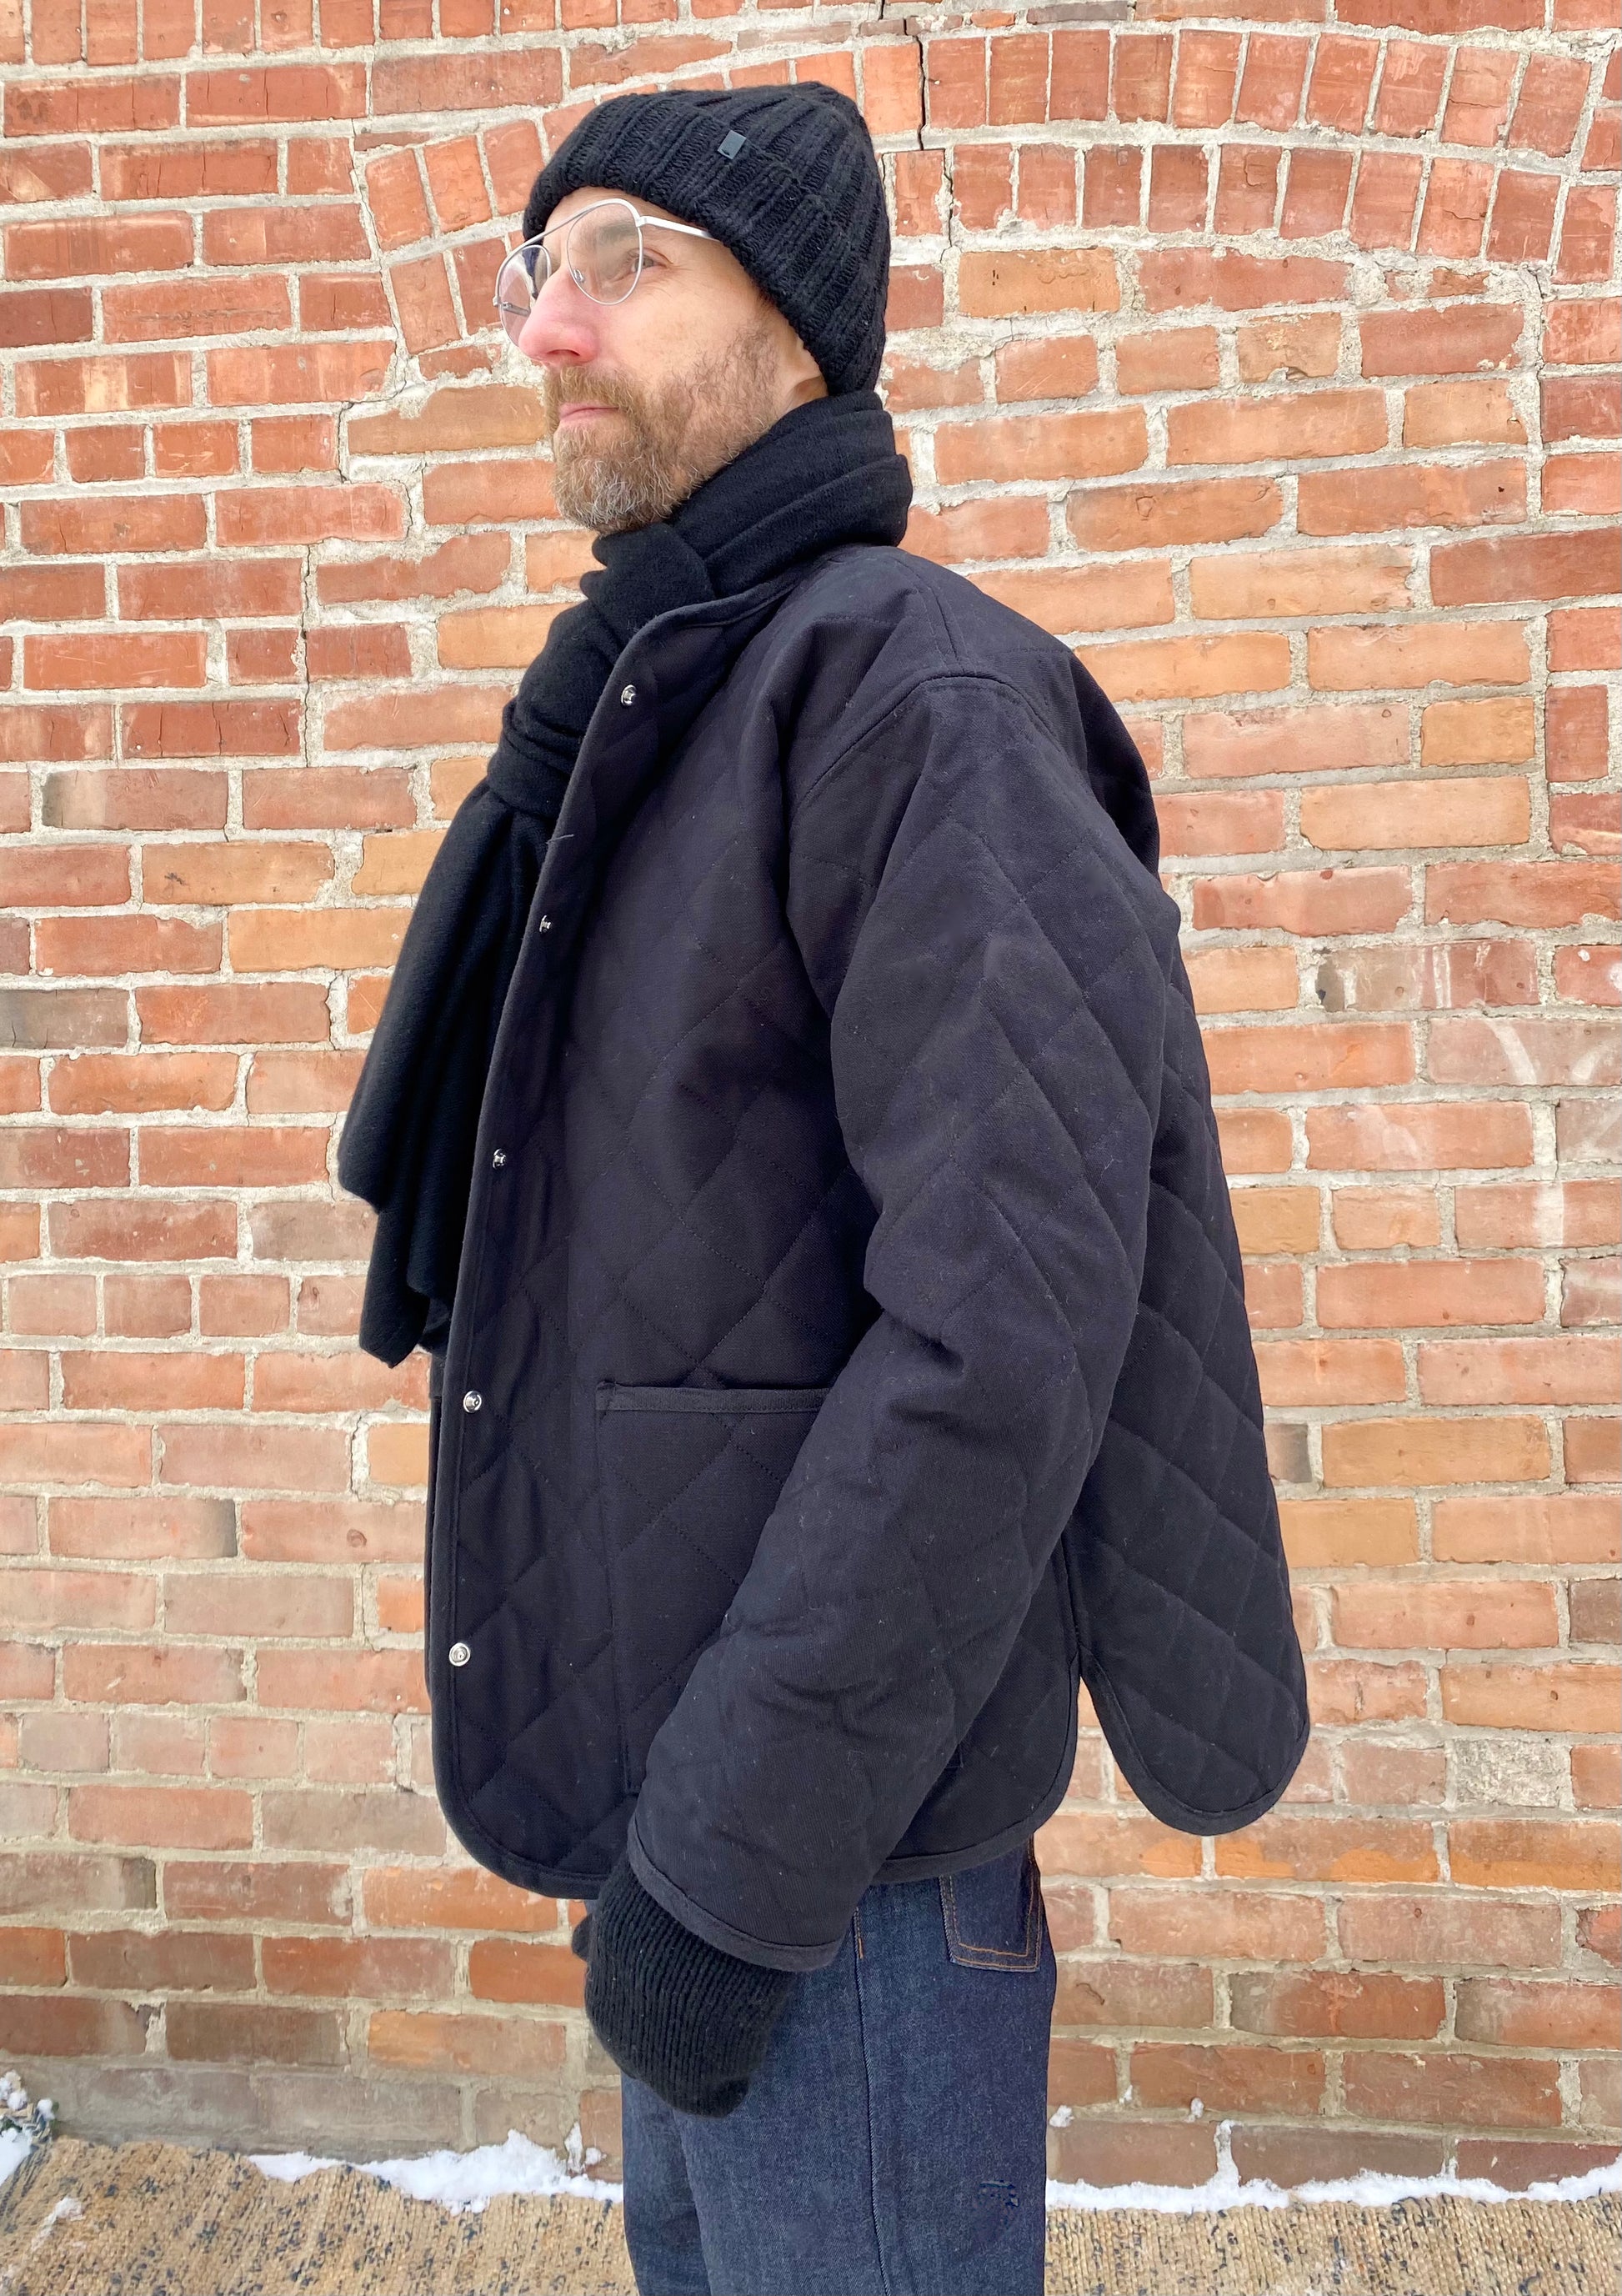 Seek Shelter Milo Coat in Black made in Vancouver Canada 